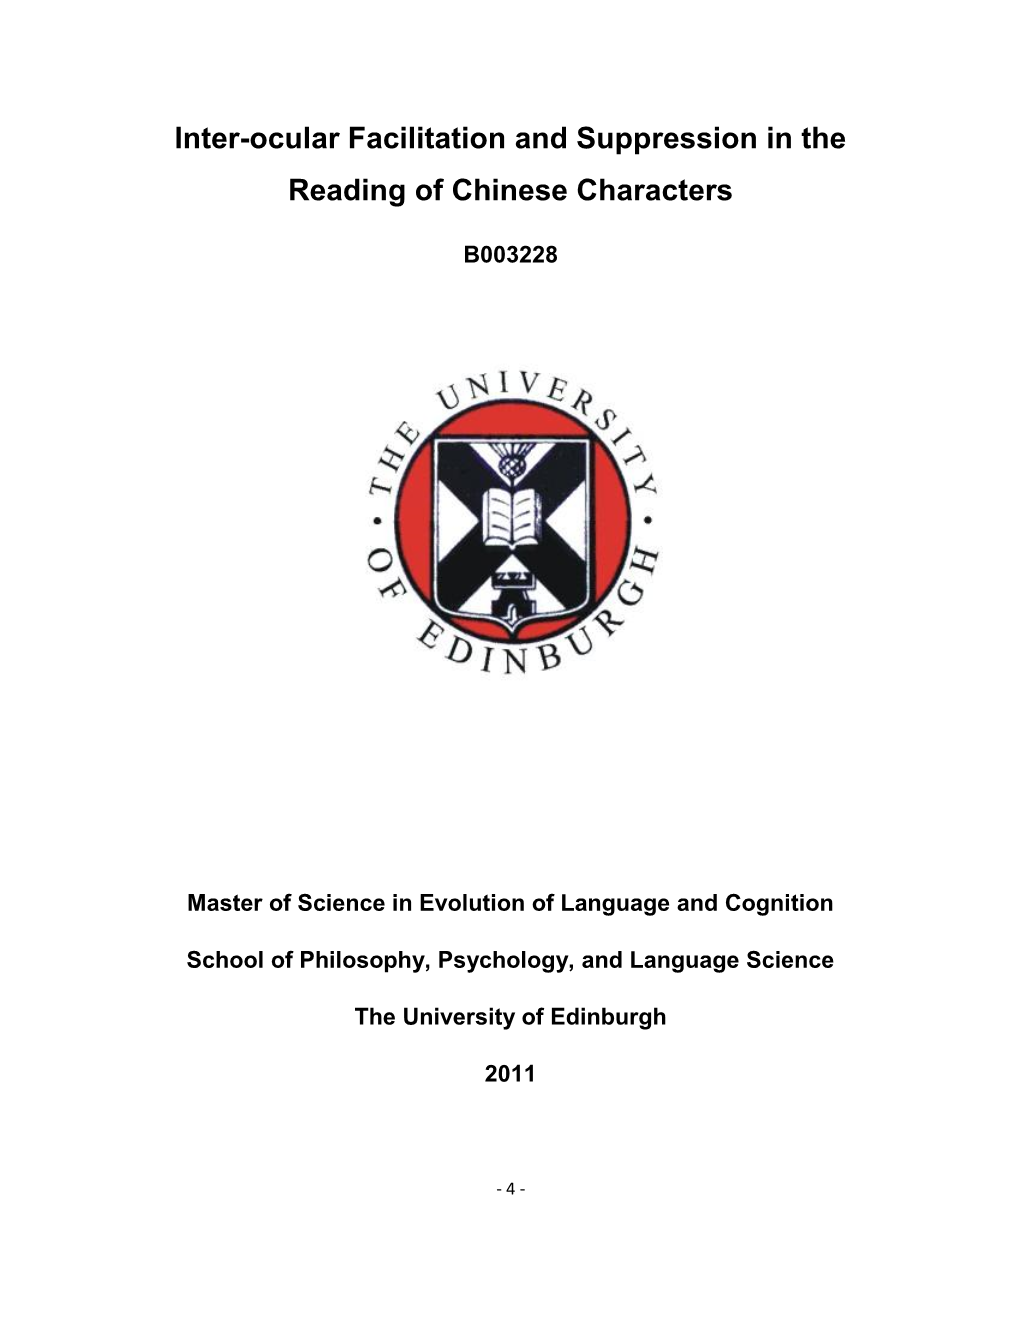 Inter-Ocular Facilitation and Suppression in the Reading of Chinese Characters